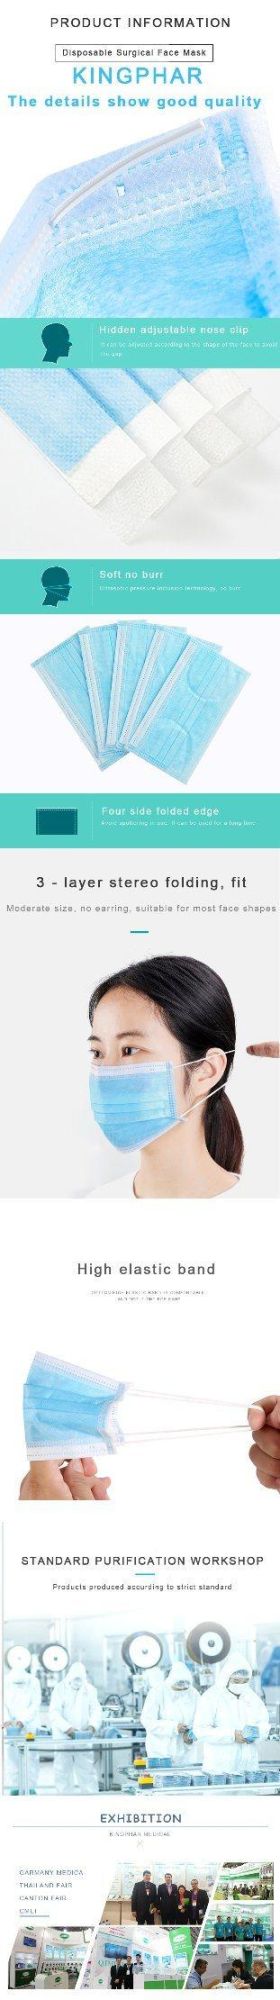 Medical Face Masks with Test Report Protective Masks with Ear-Loop